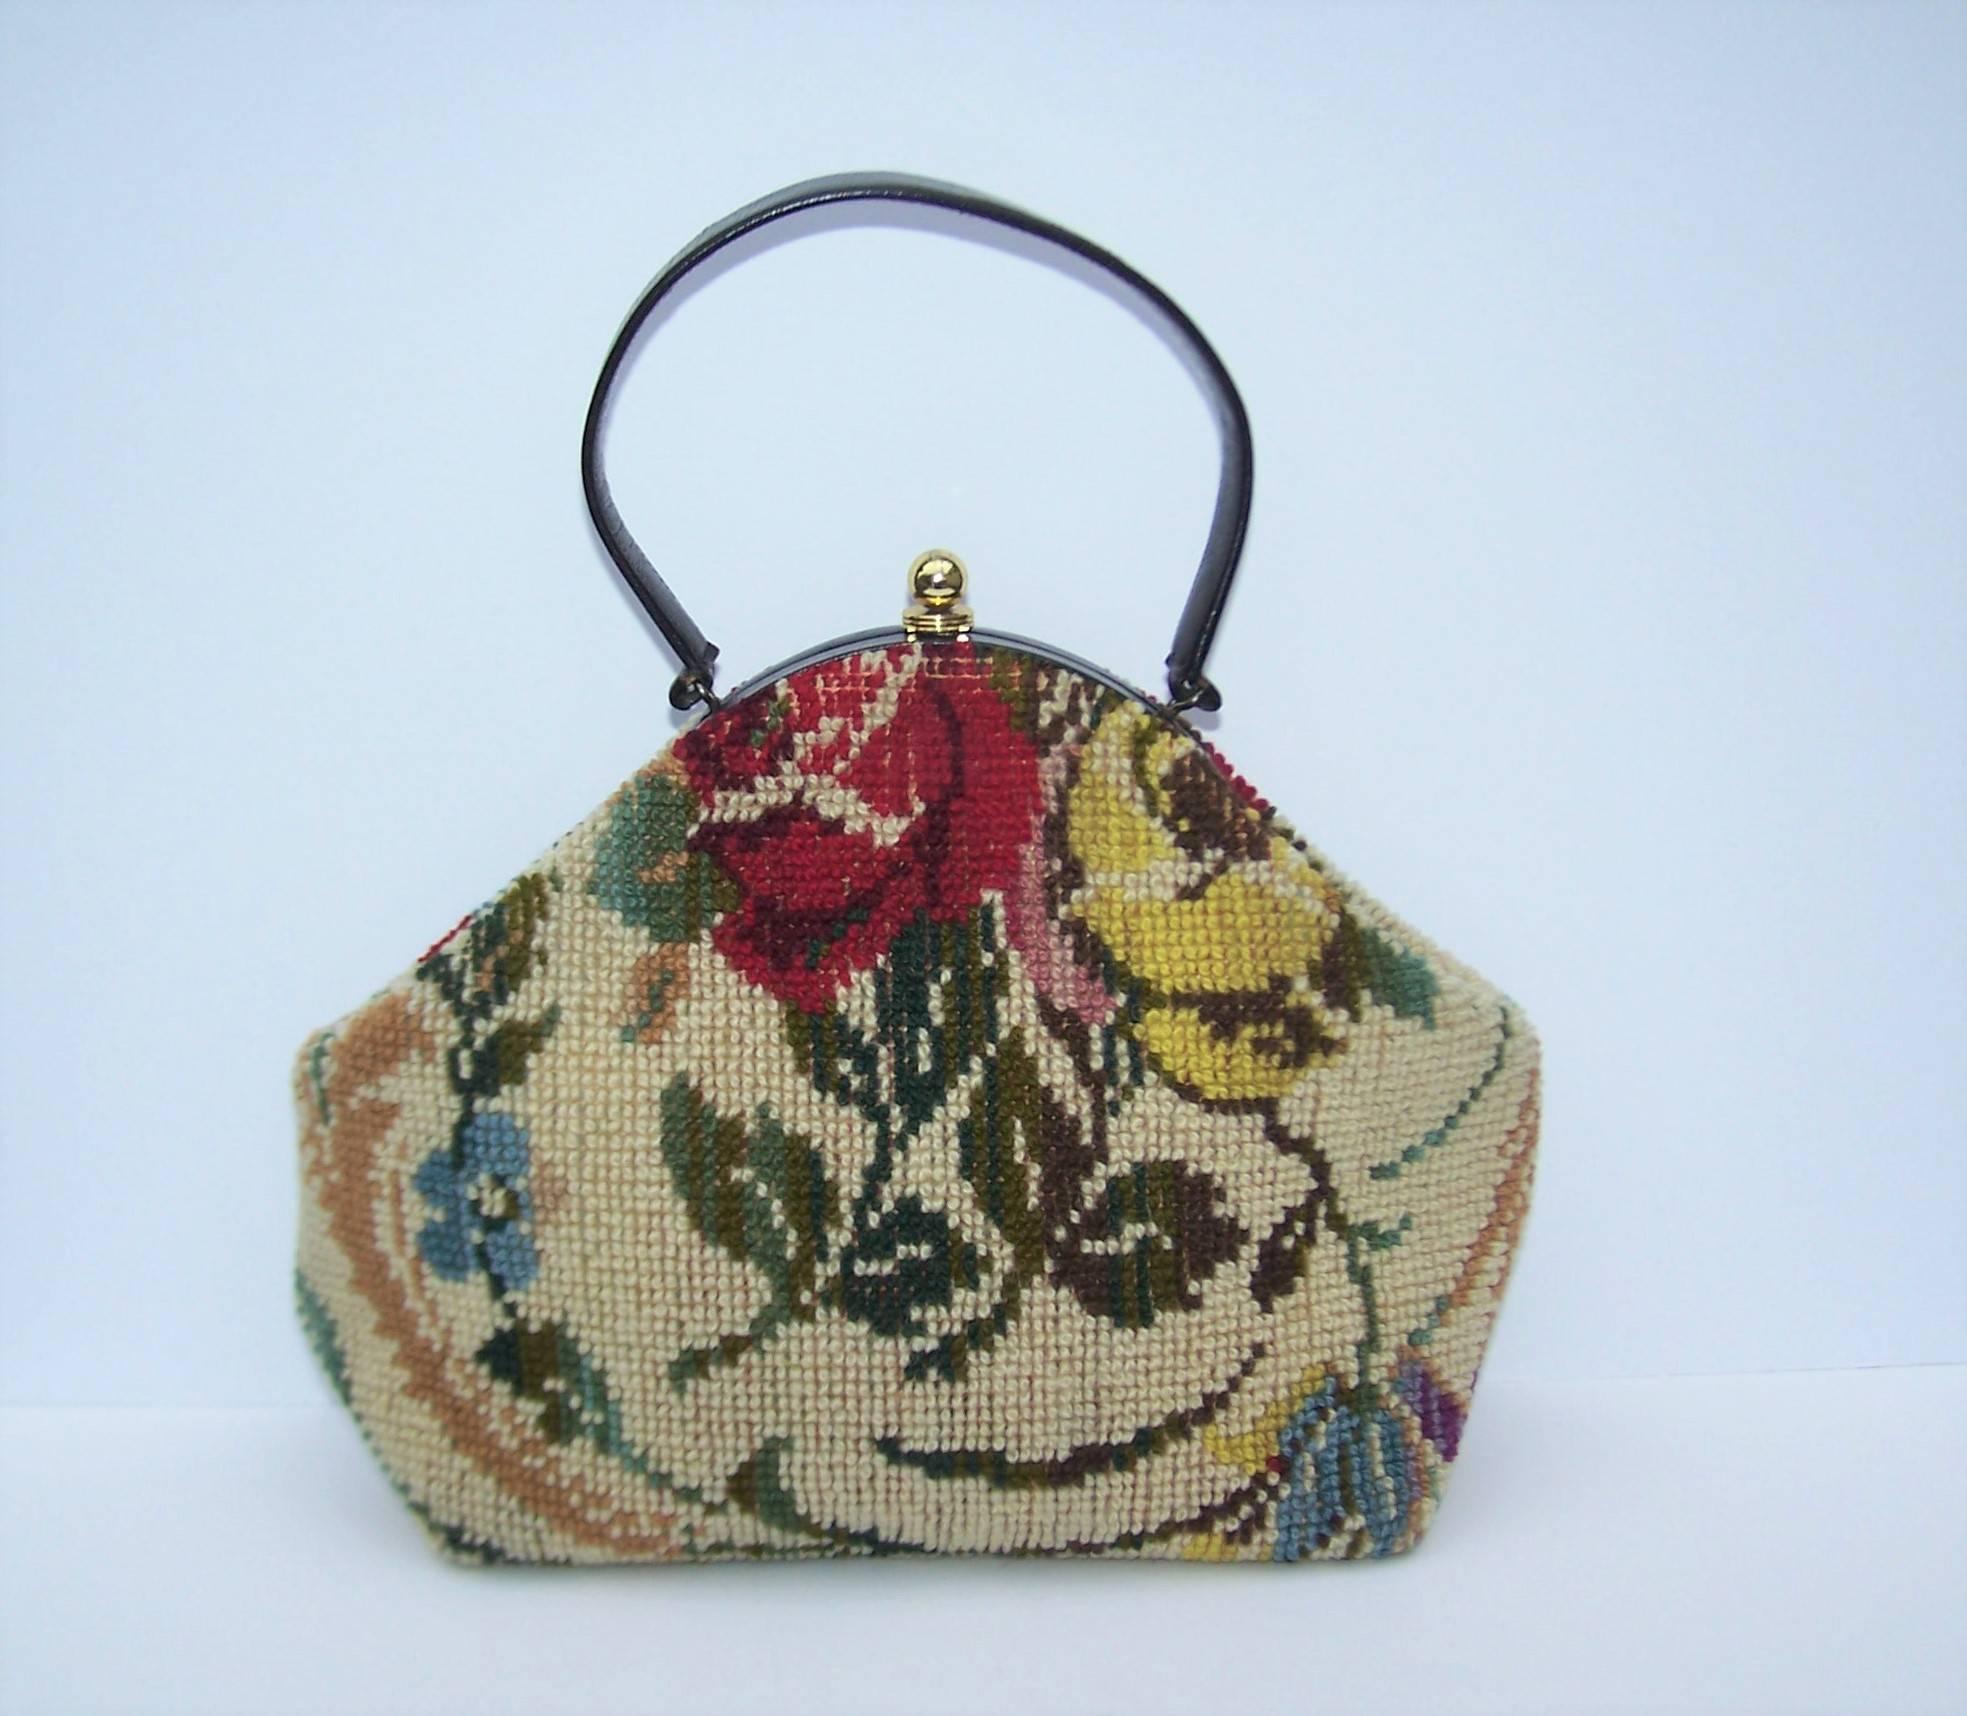 Jana is best known for producing Emilio Pucci's handbags in the 1960's and 1970's.  They also produced some fun carpetbag handbags and you are looking at a great example.  It securely closes at the top with a gold tone push closure.  The roomy